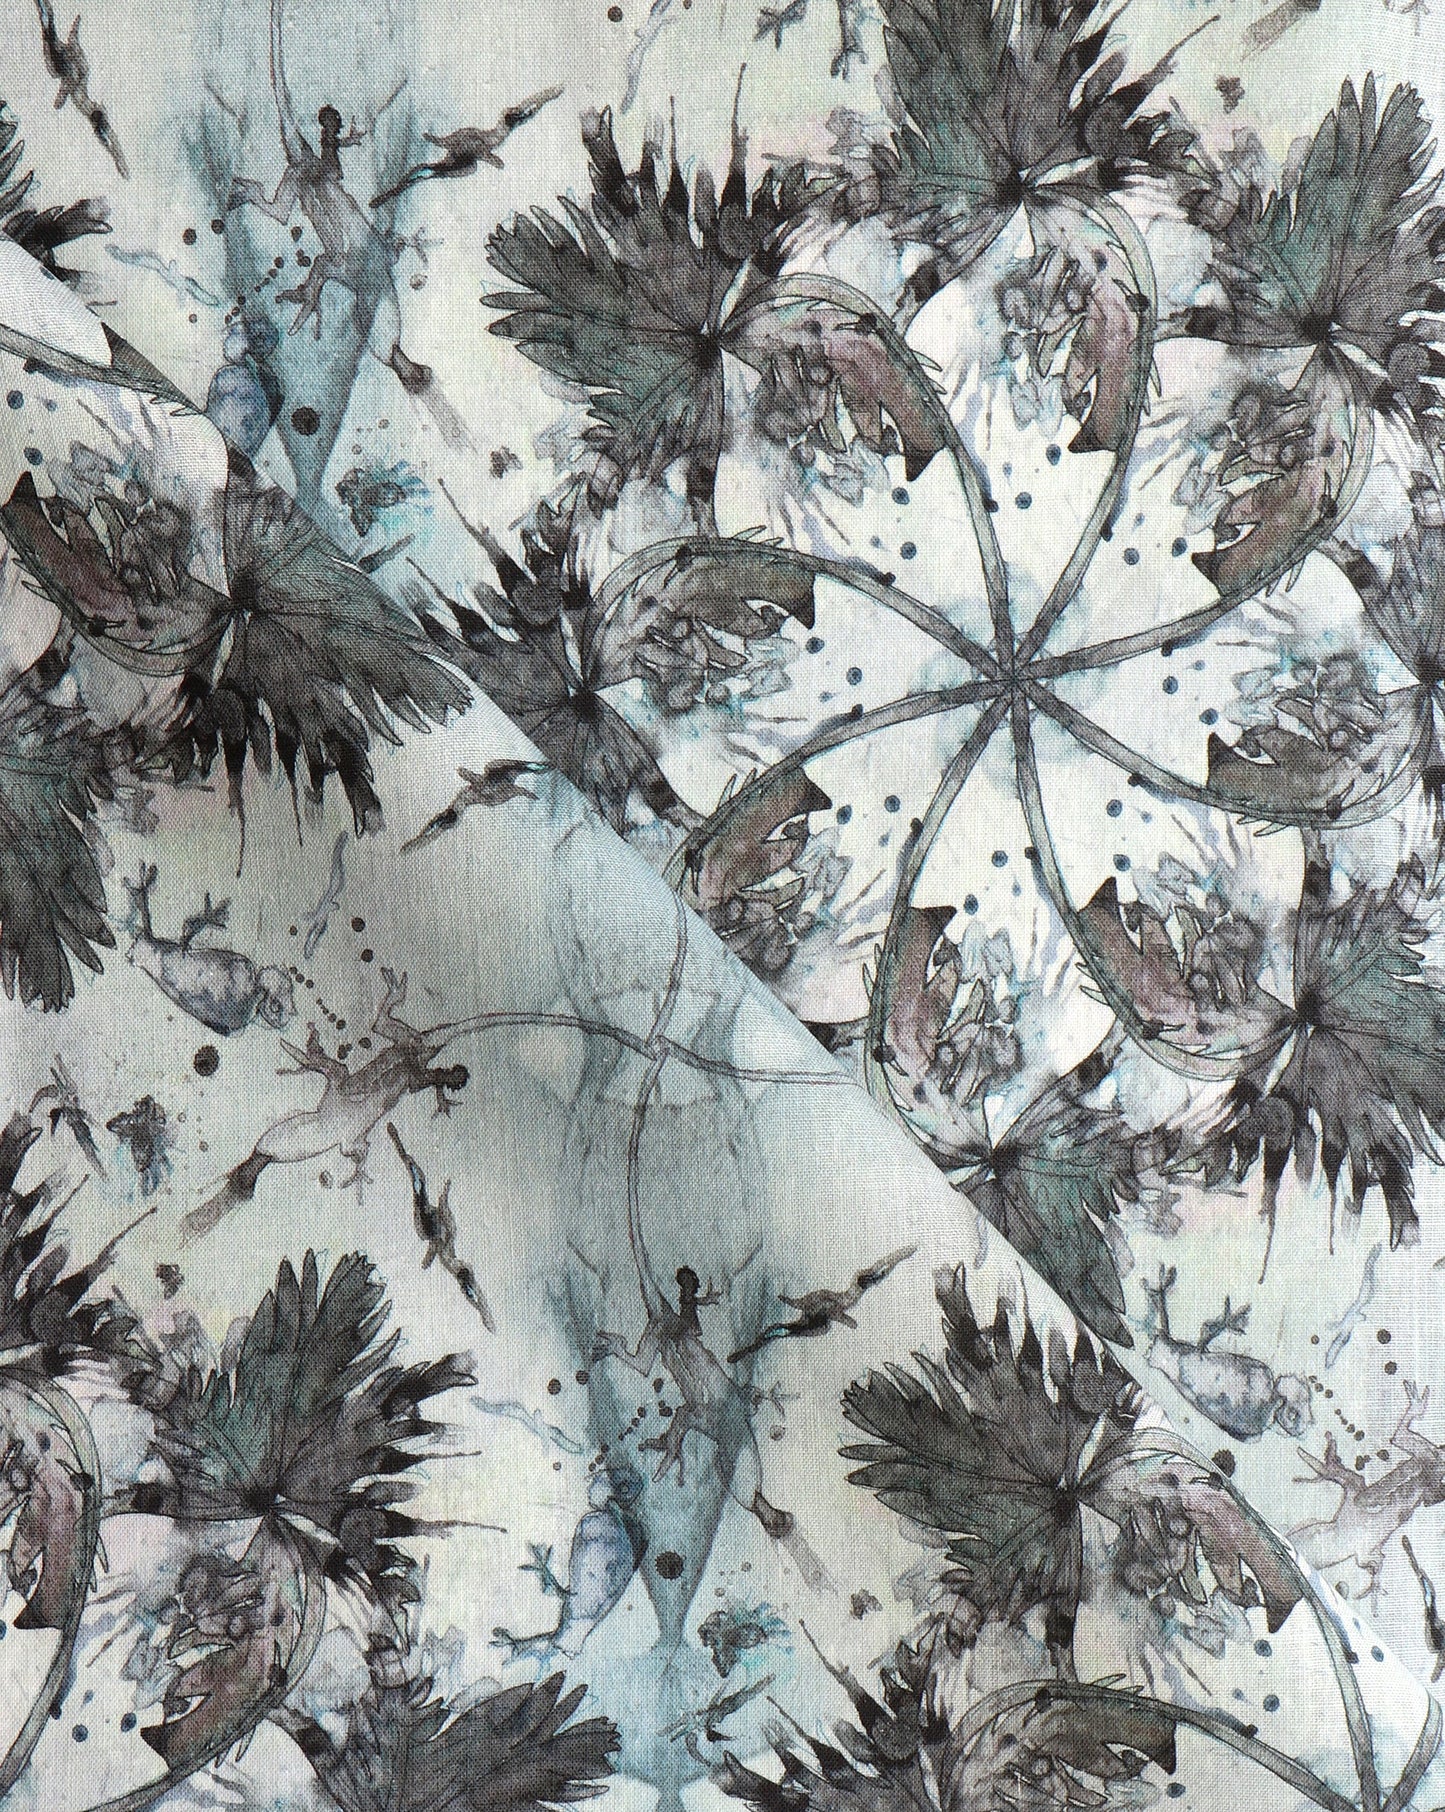 A high-end Laurel Forest Fabric with a black and white floral pattern creates a tropical atmosphere reminiscent of the Laurel Forest